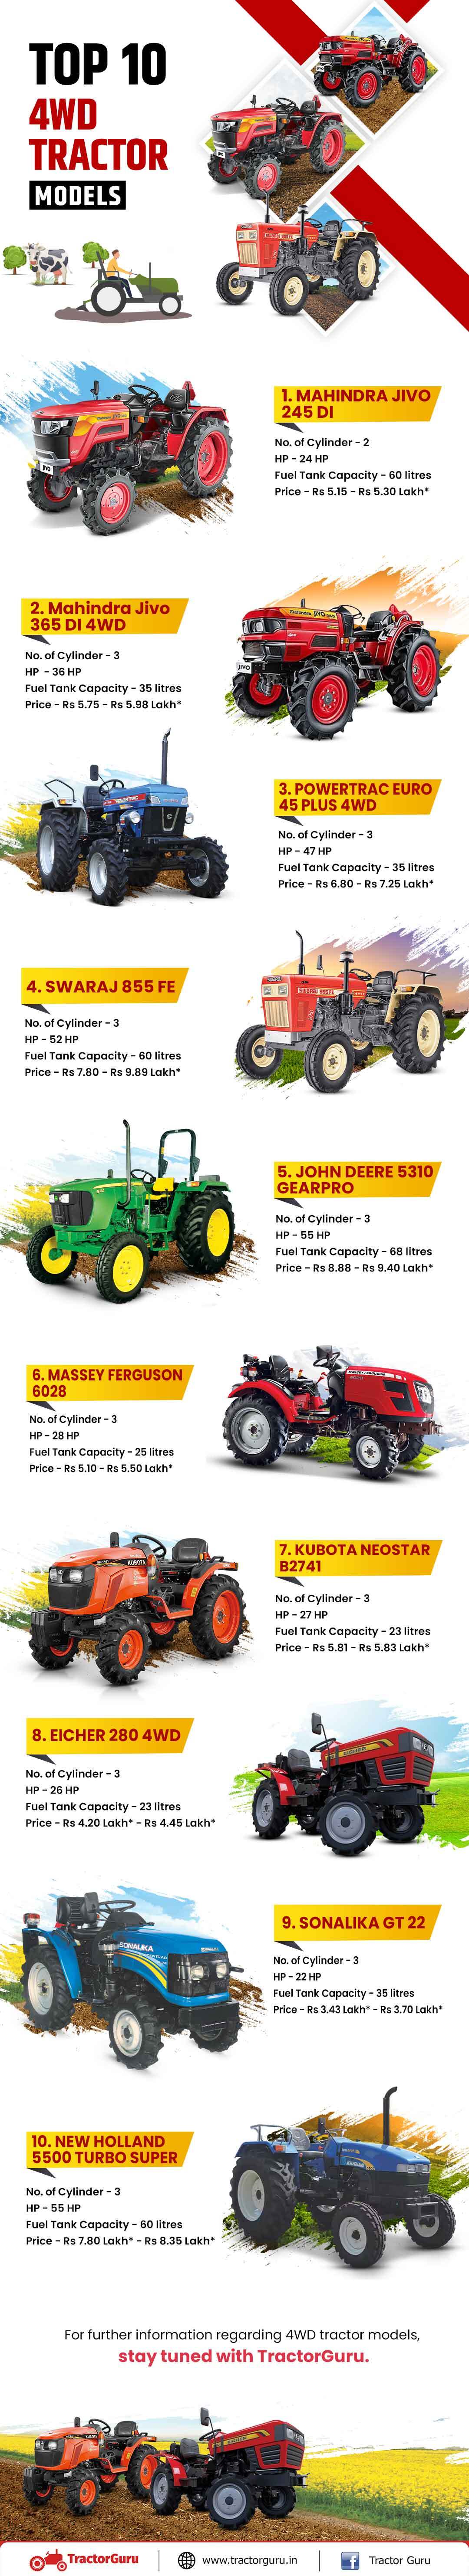 Top 10 4WD Tractor Infographic